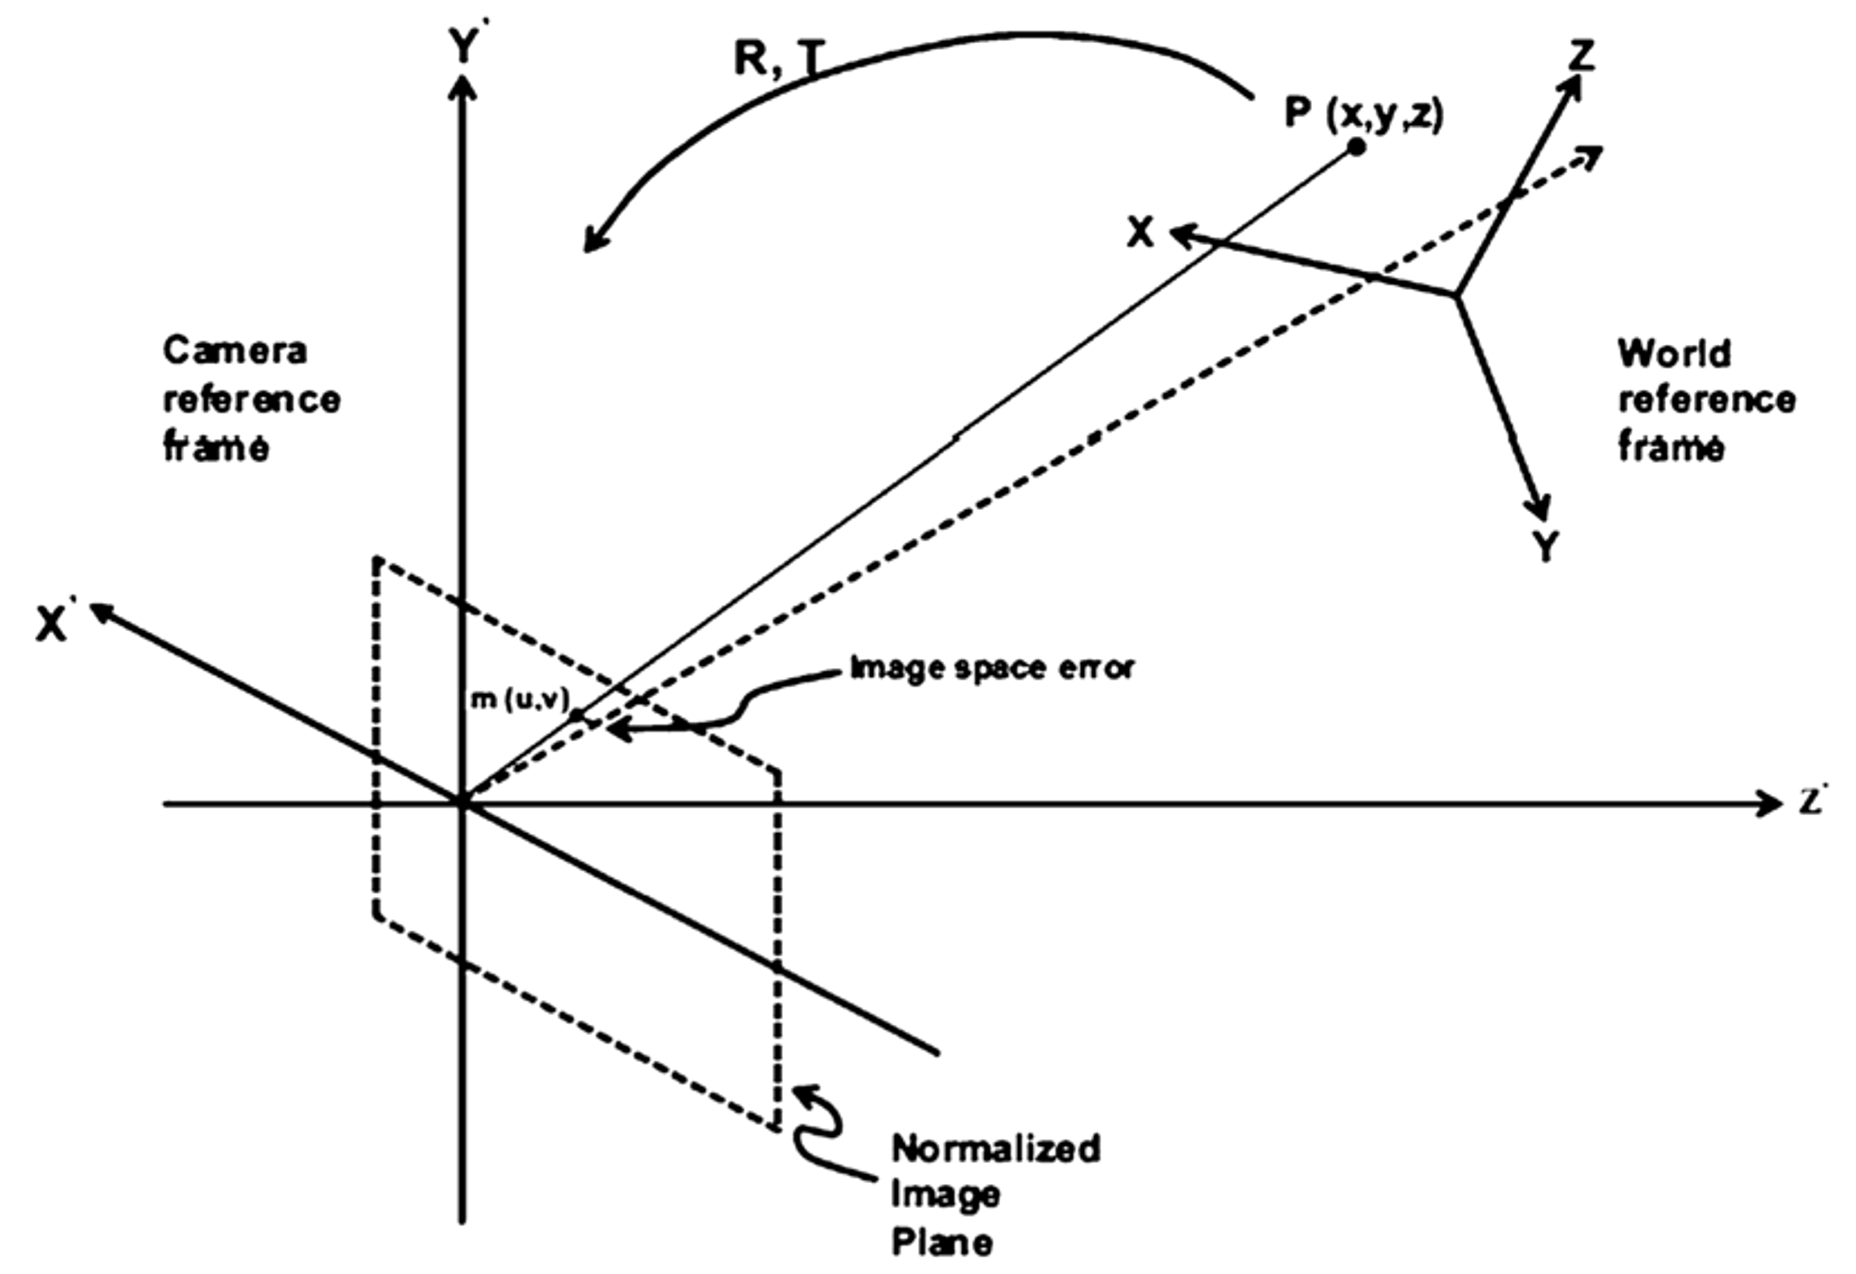 Fig. 2. Point constraints for the camera pose problem adapted from [5]